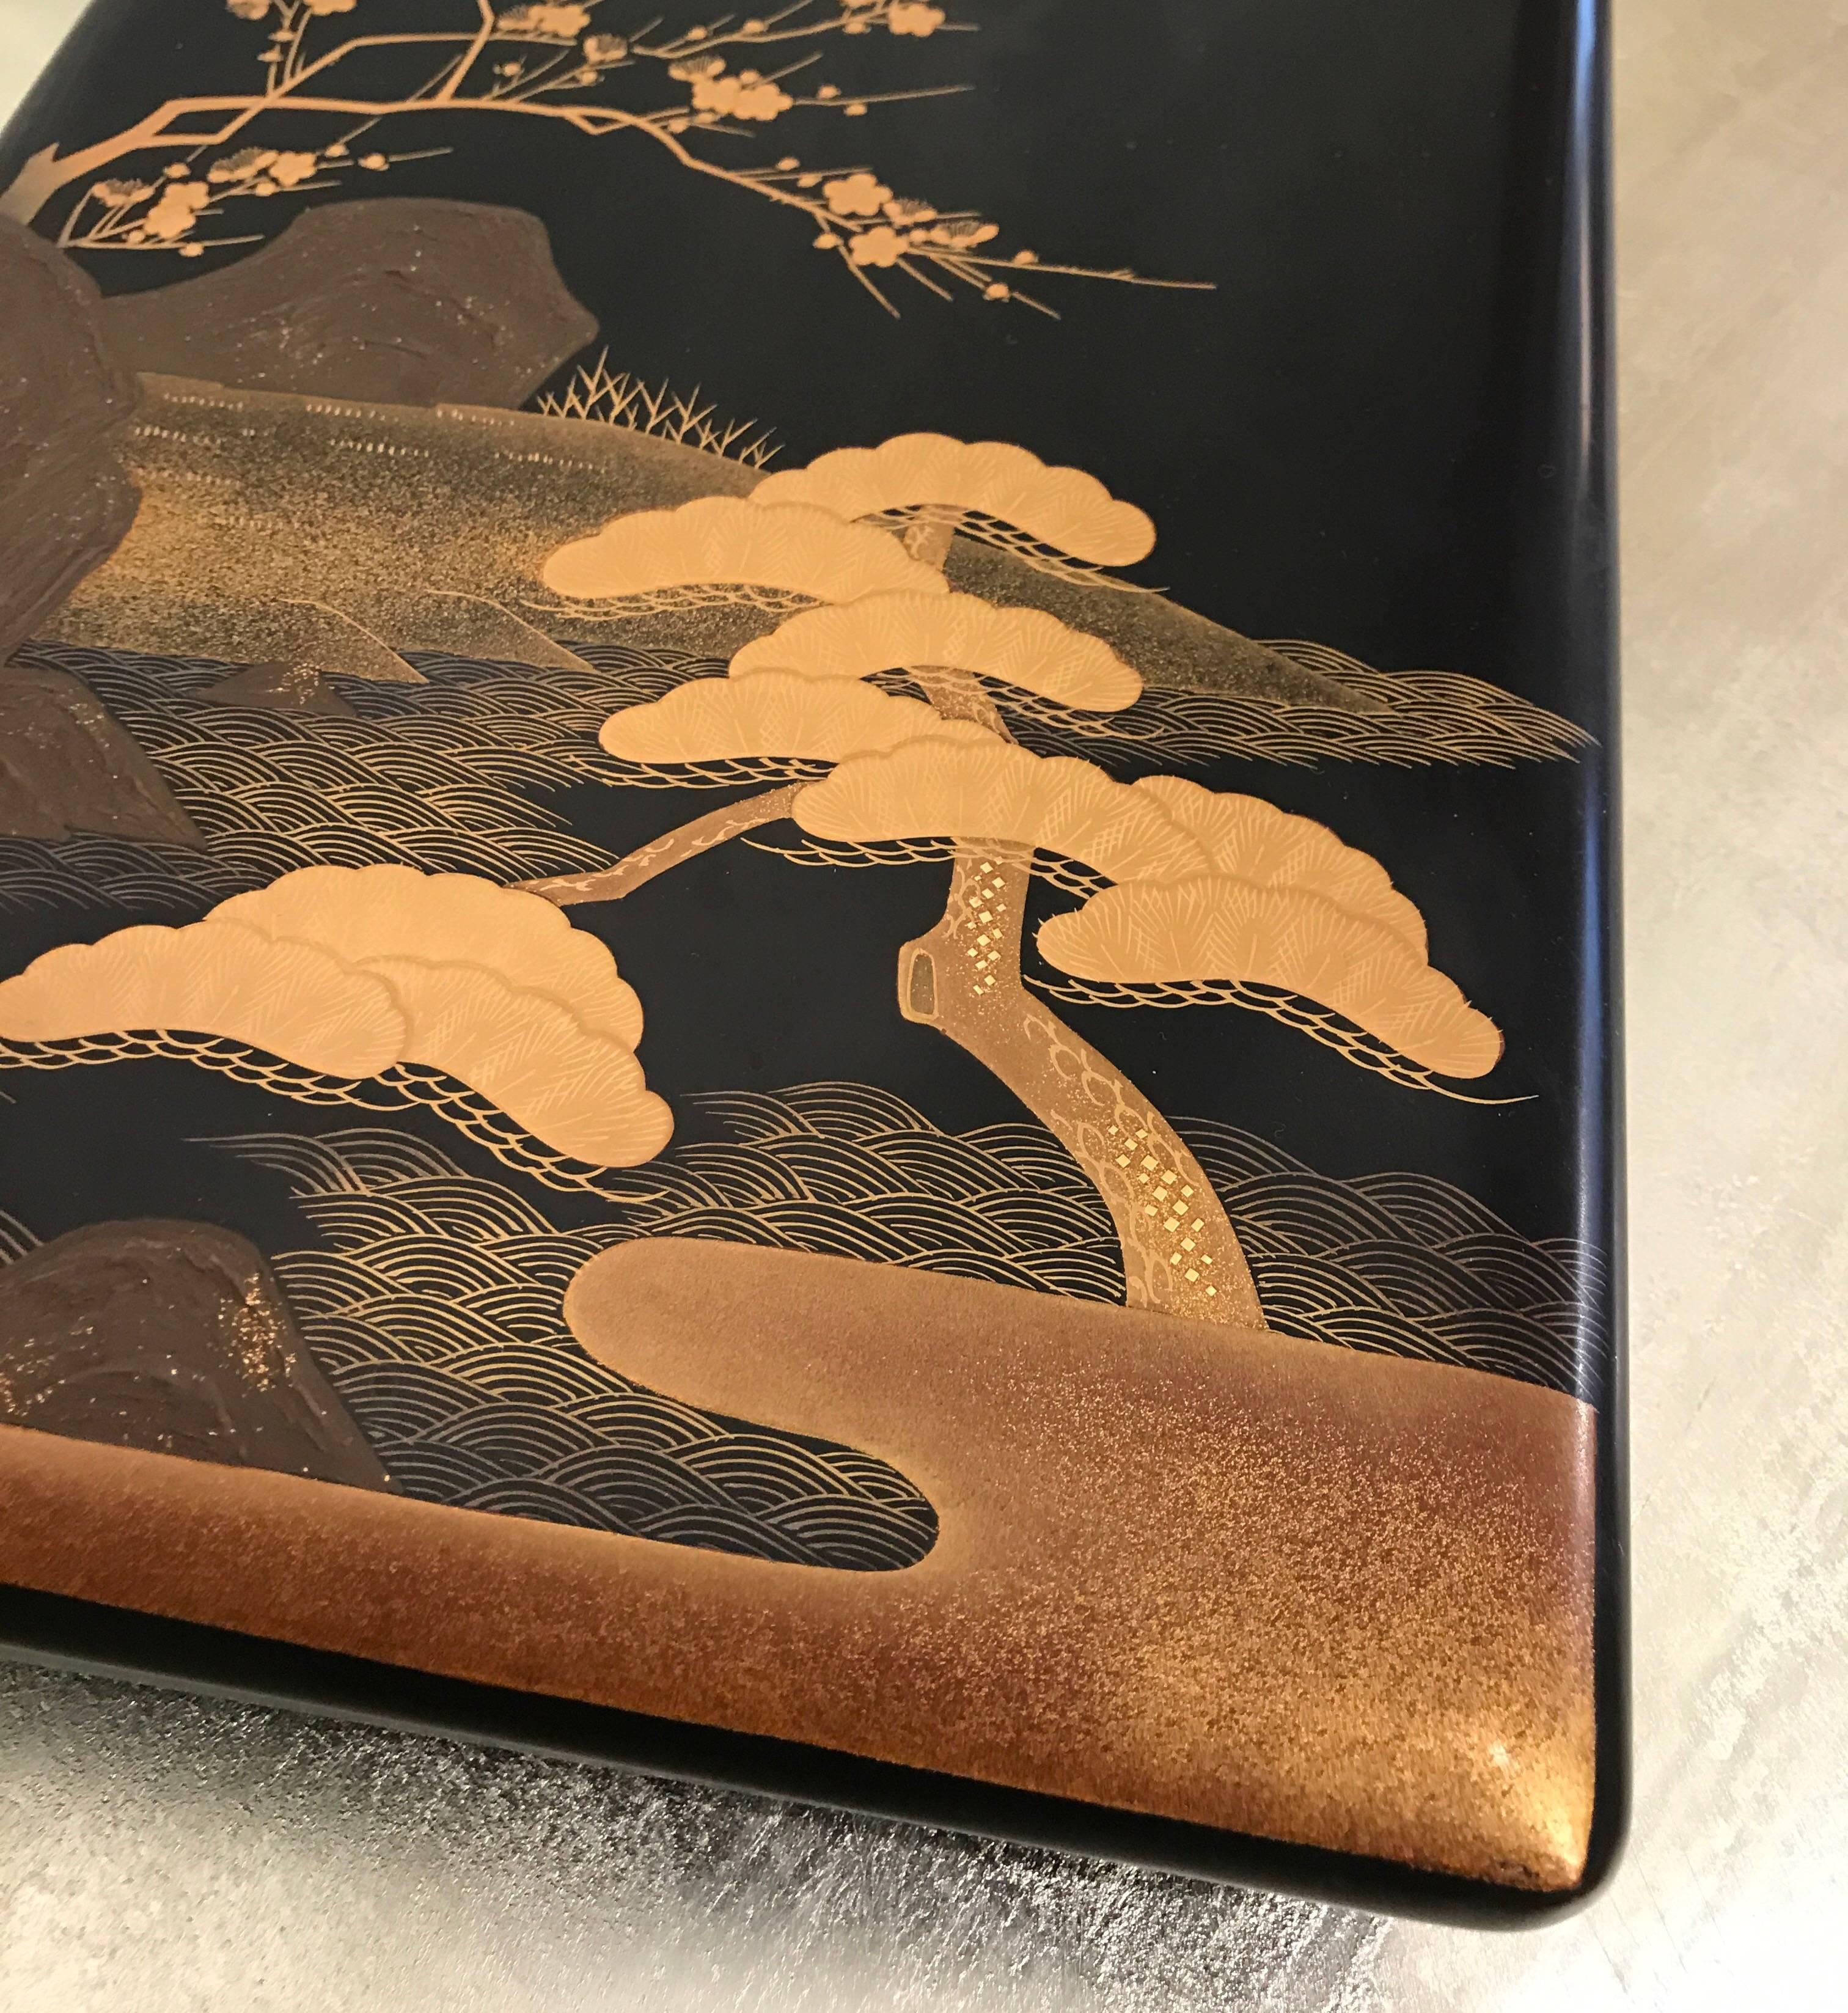 Early 20th century Japanese black lacquer box with design of cherry blossoms, pine trees and water.